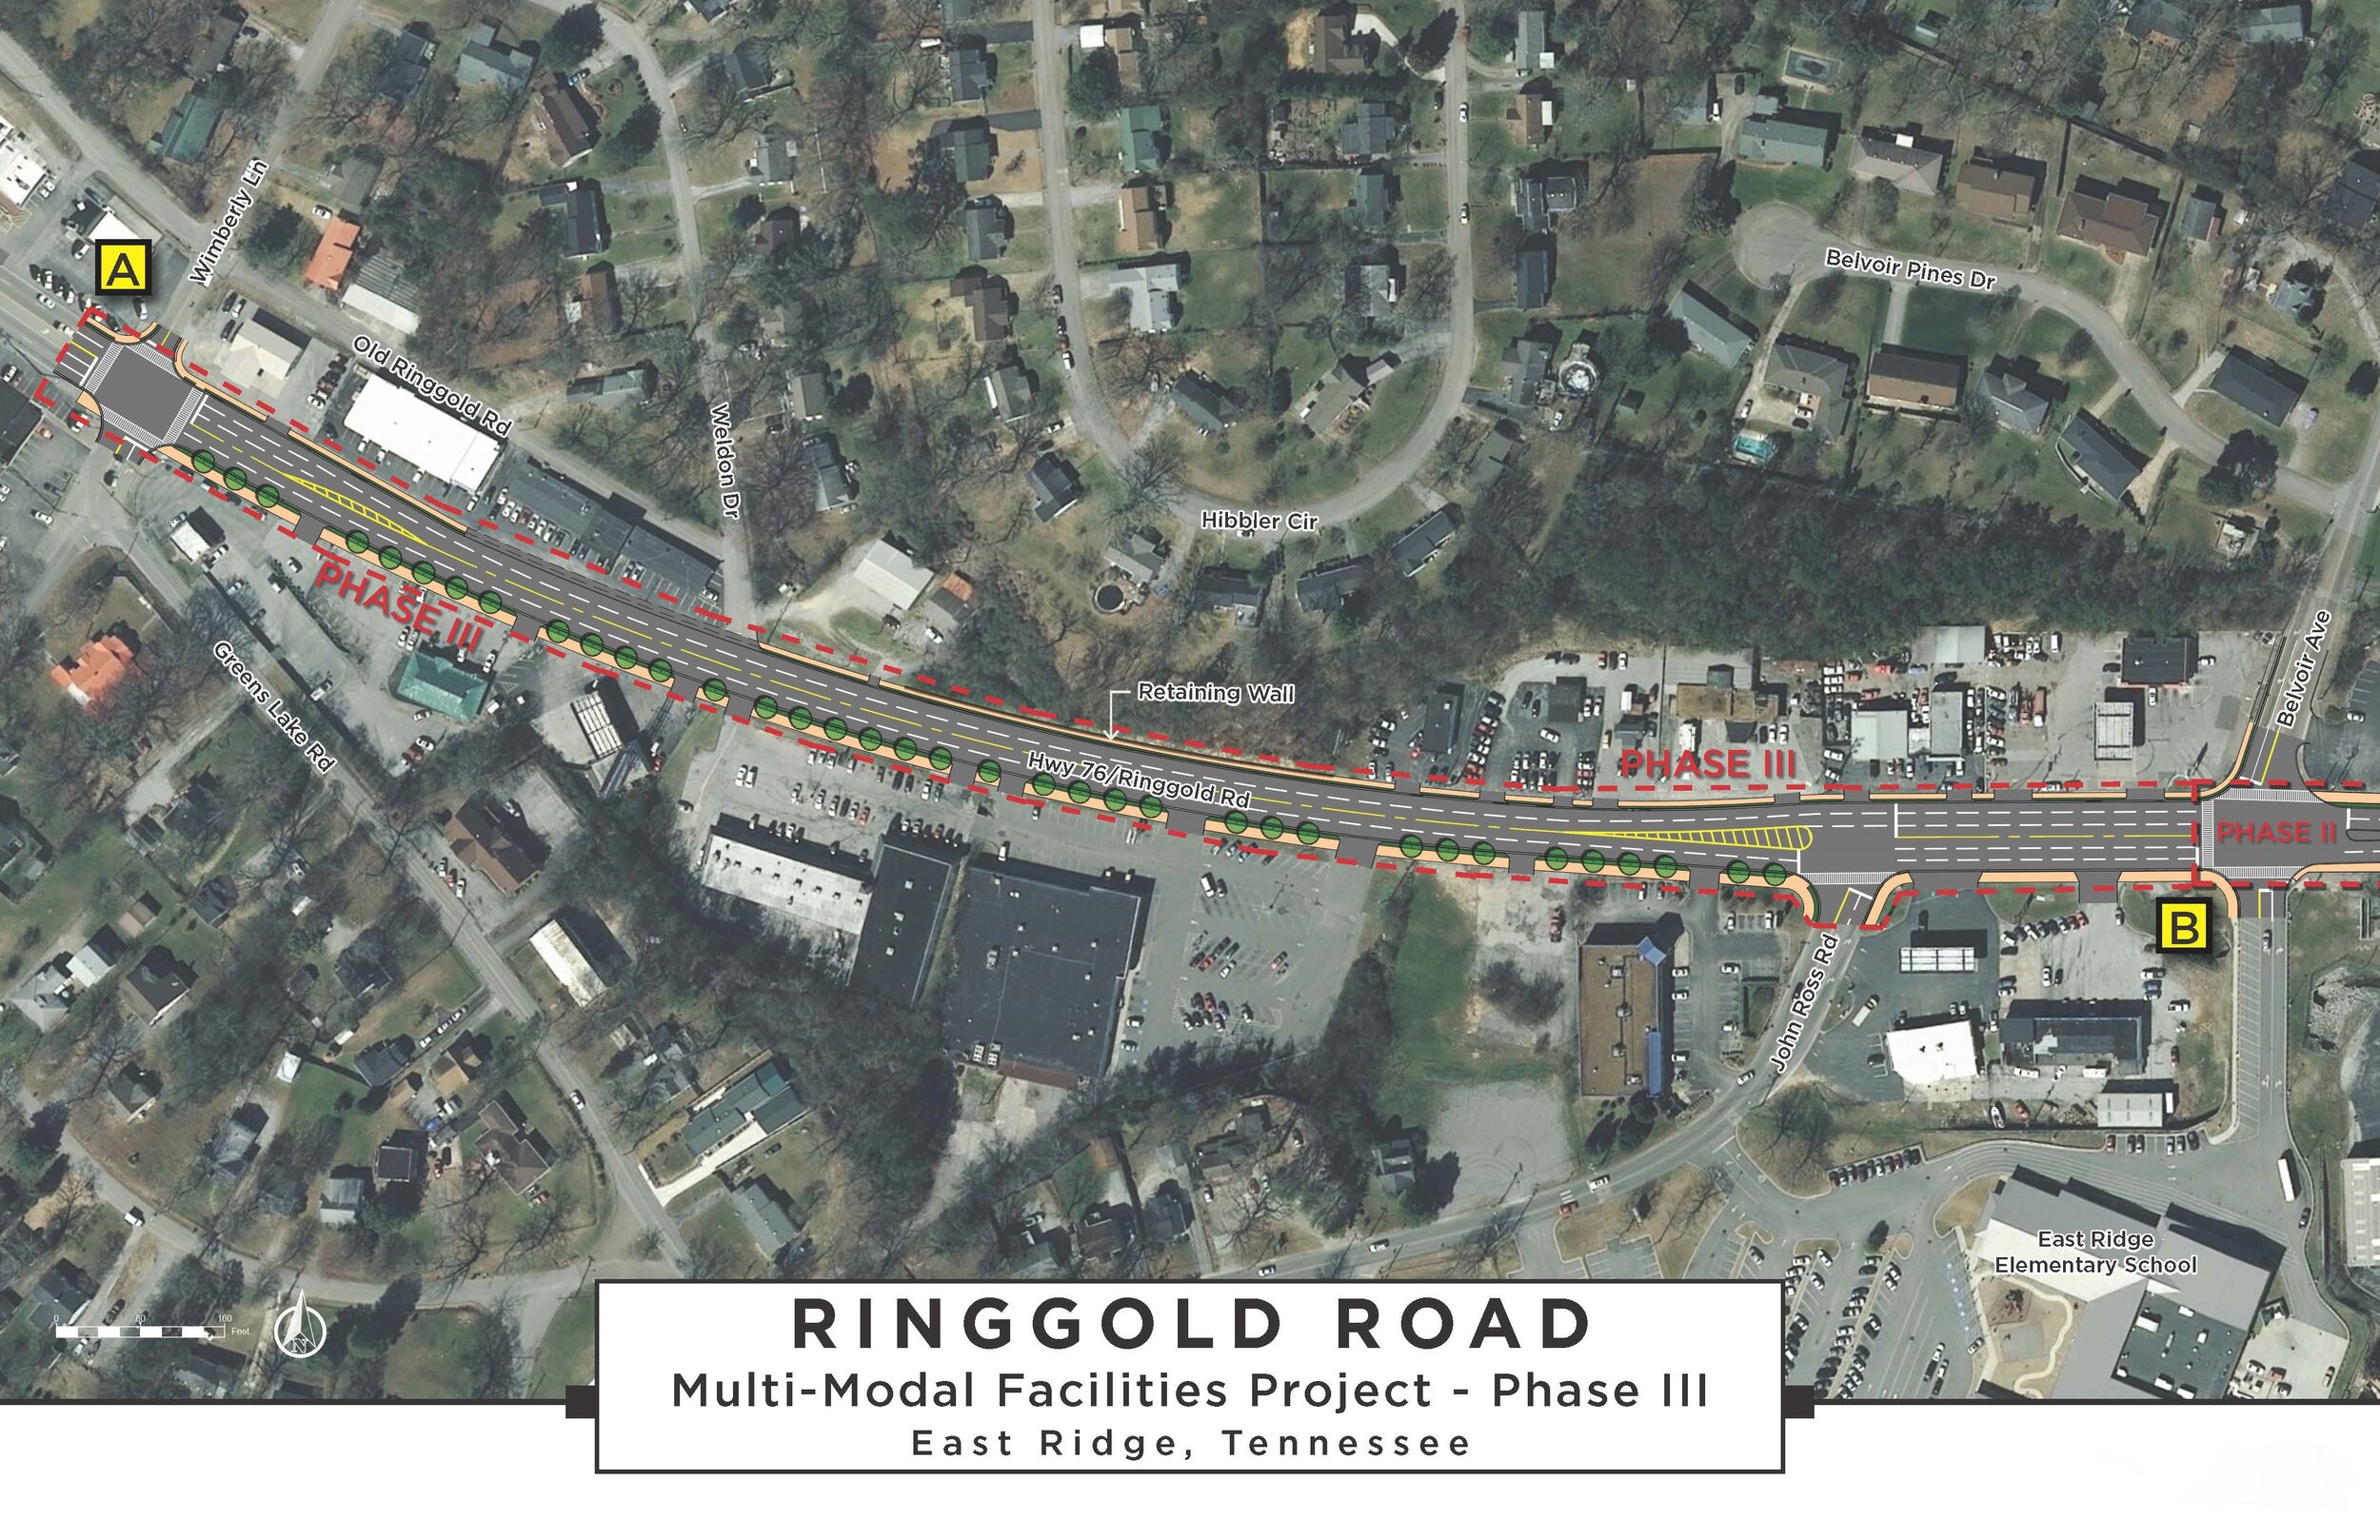 2016-01-04_Ringgold Road Phase 3 Concept.jpg